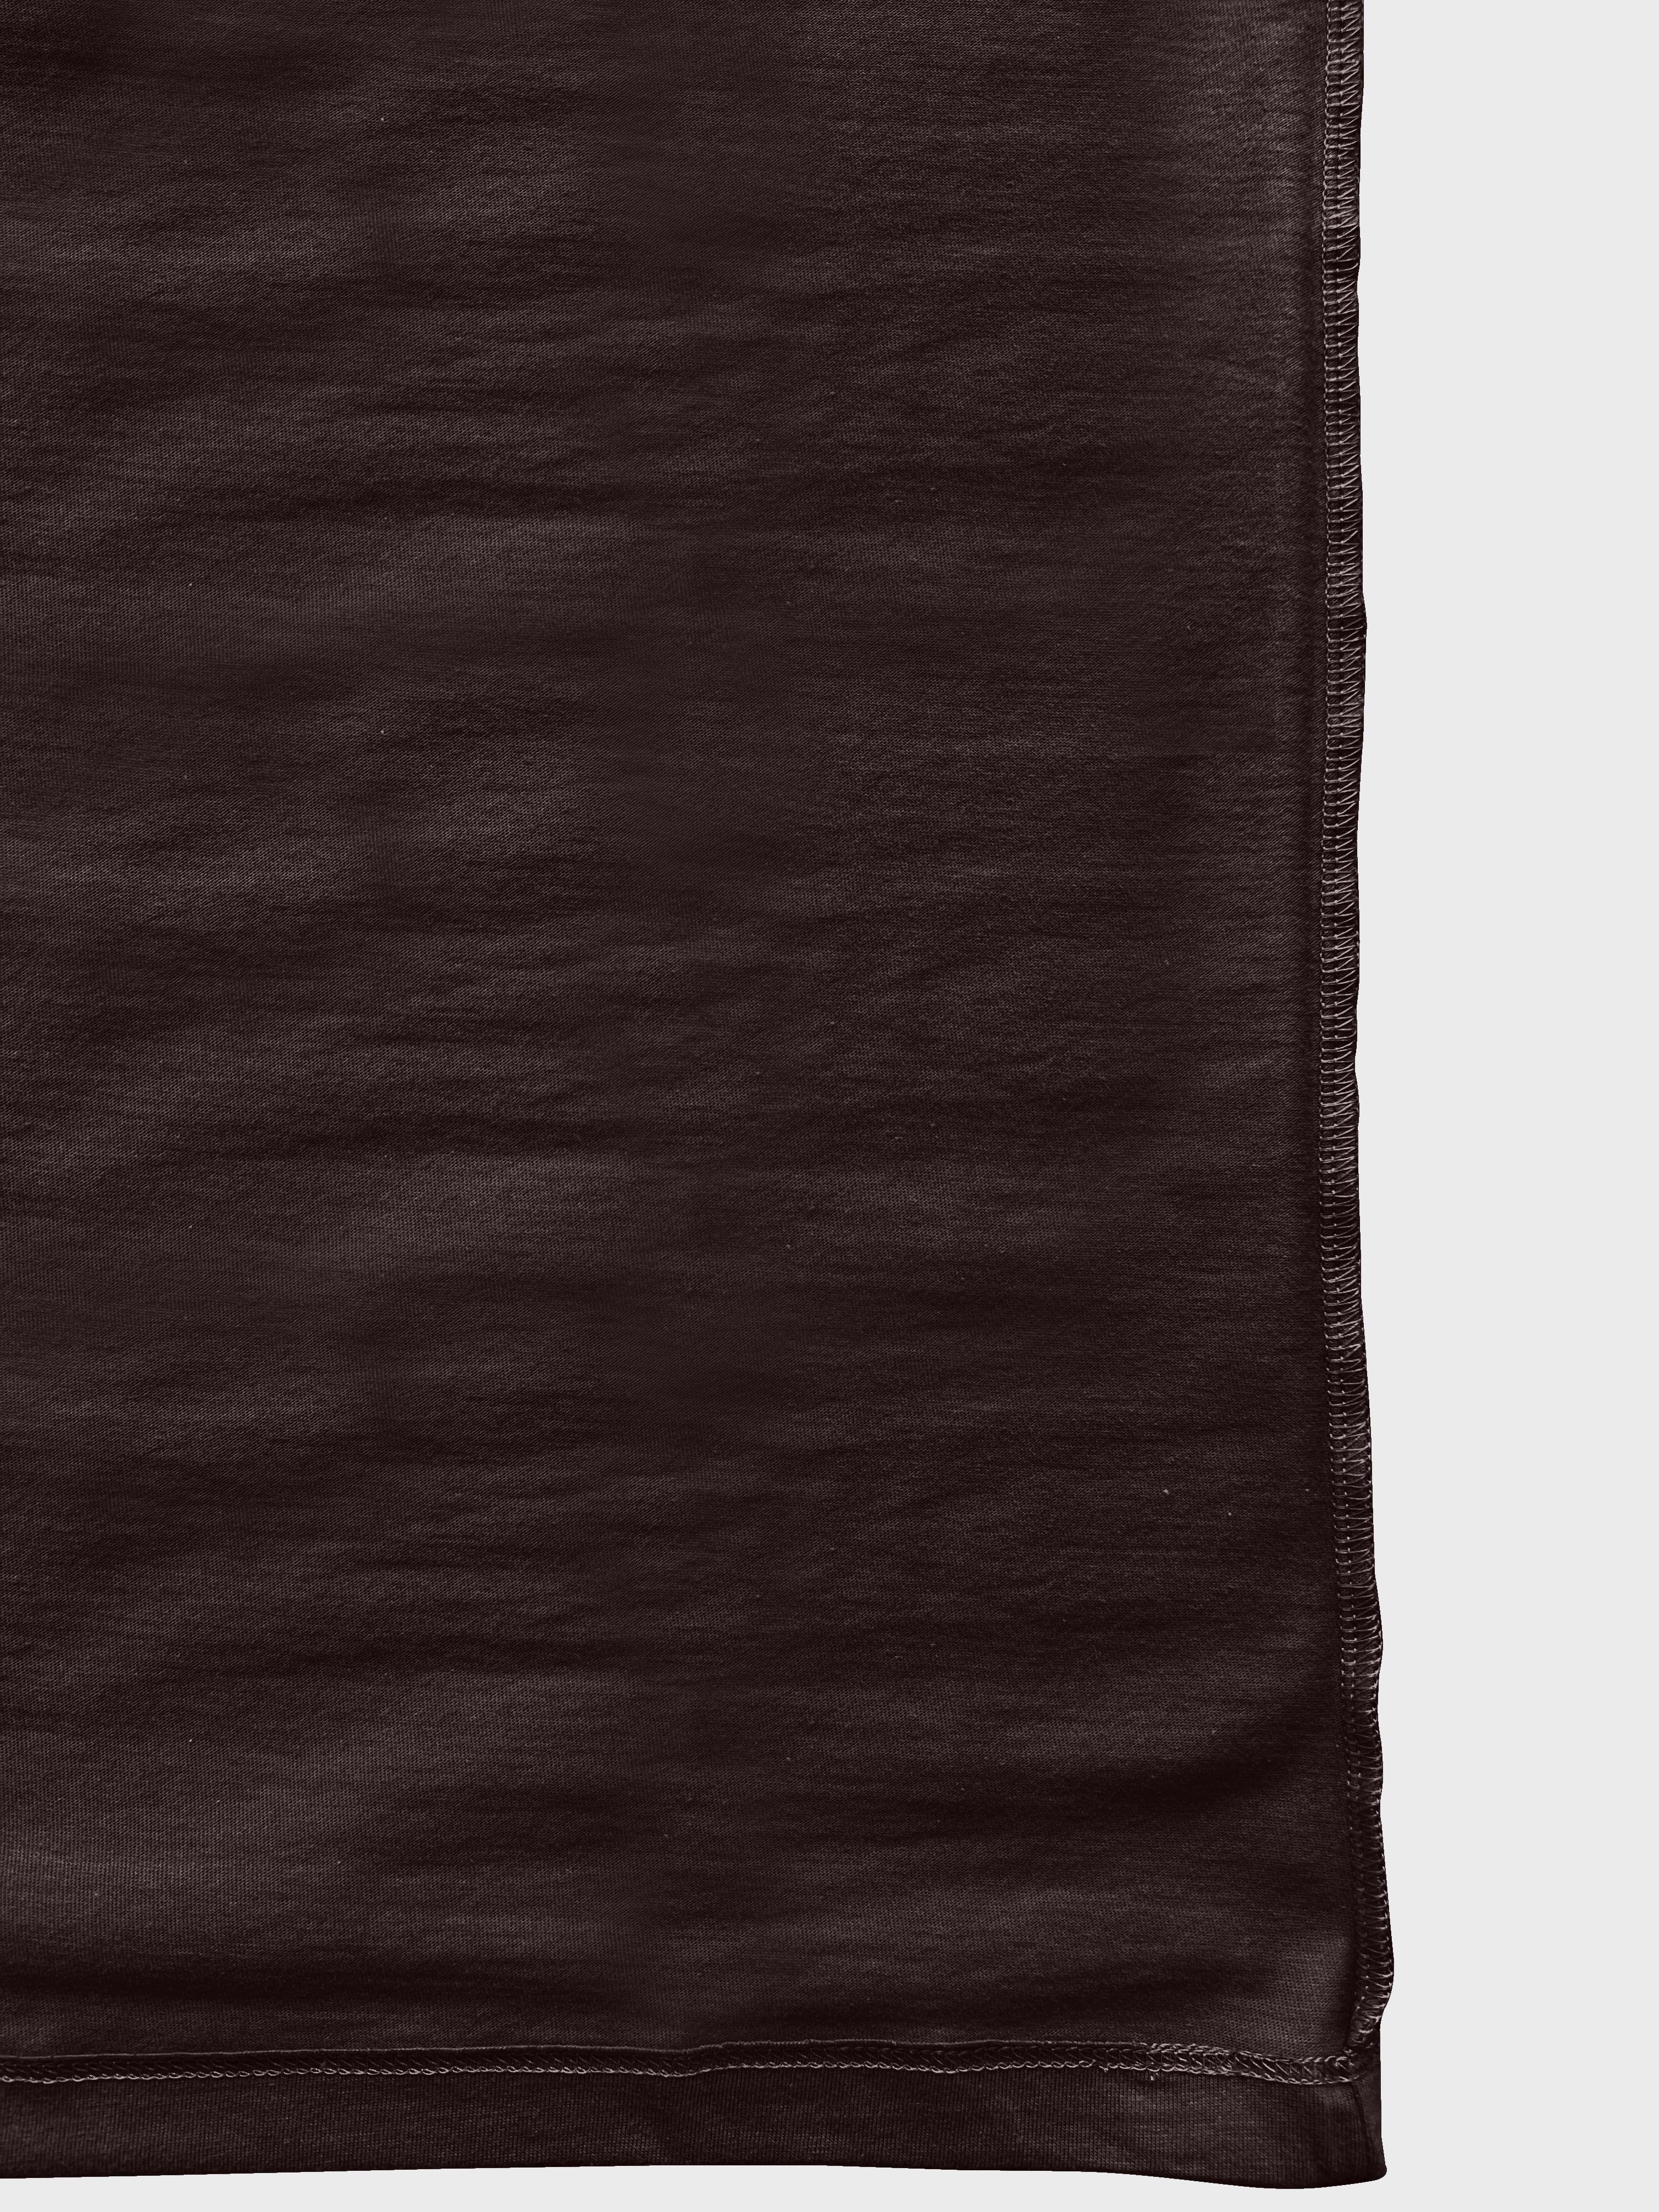 Crew neck Chocolate brown blank T-shirt in side view